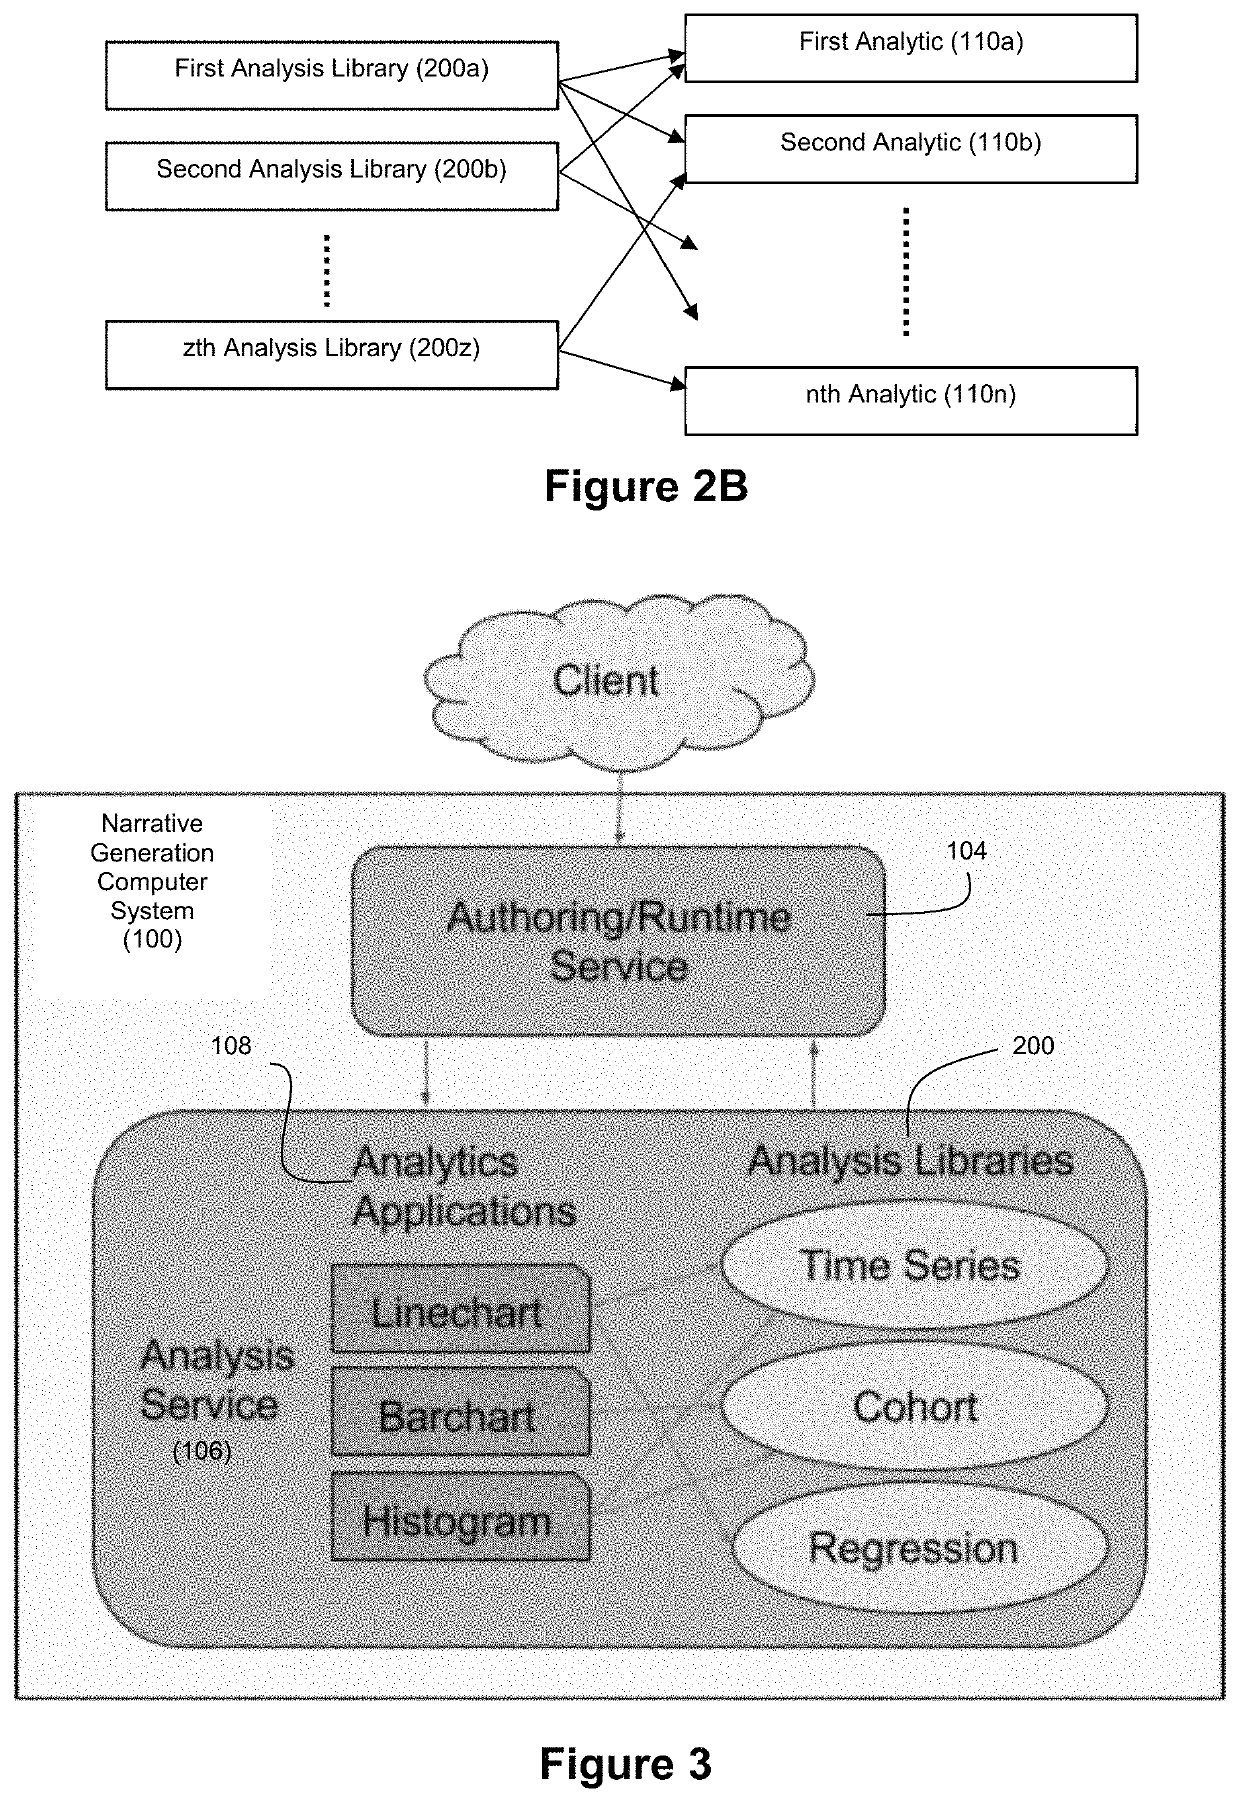 Applied artificial intelligence technology for narrative generation using an invocable analysis service and data re-organization